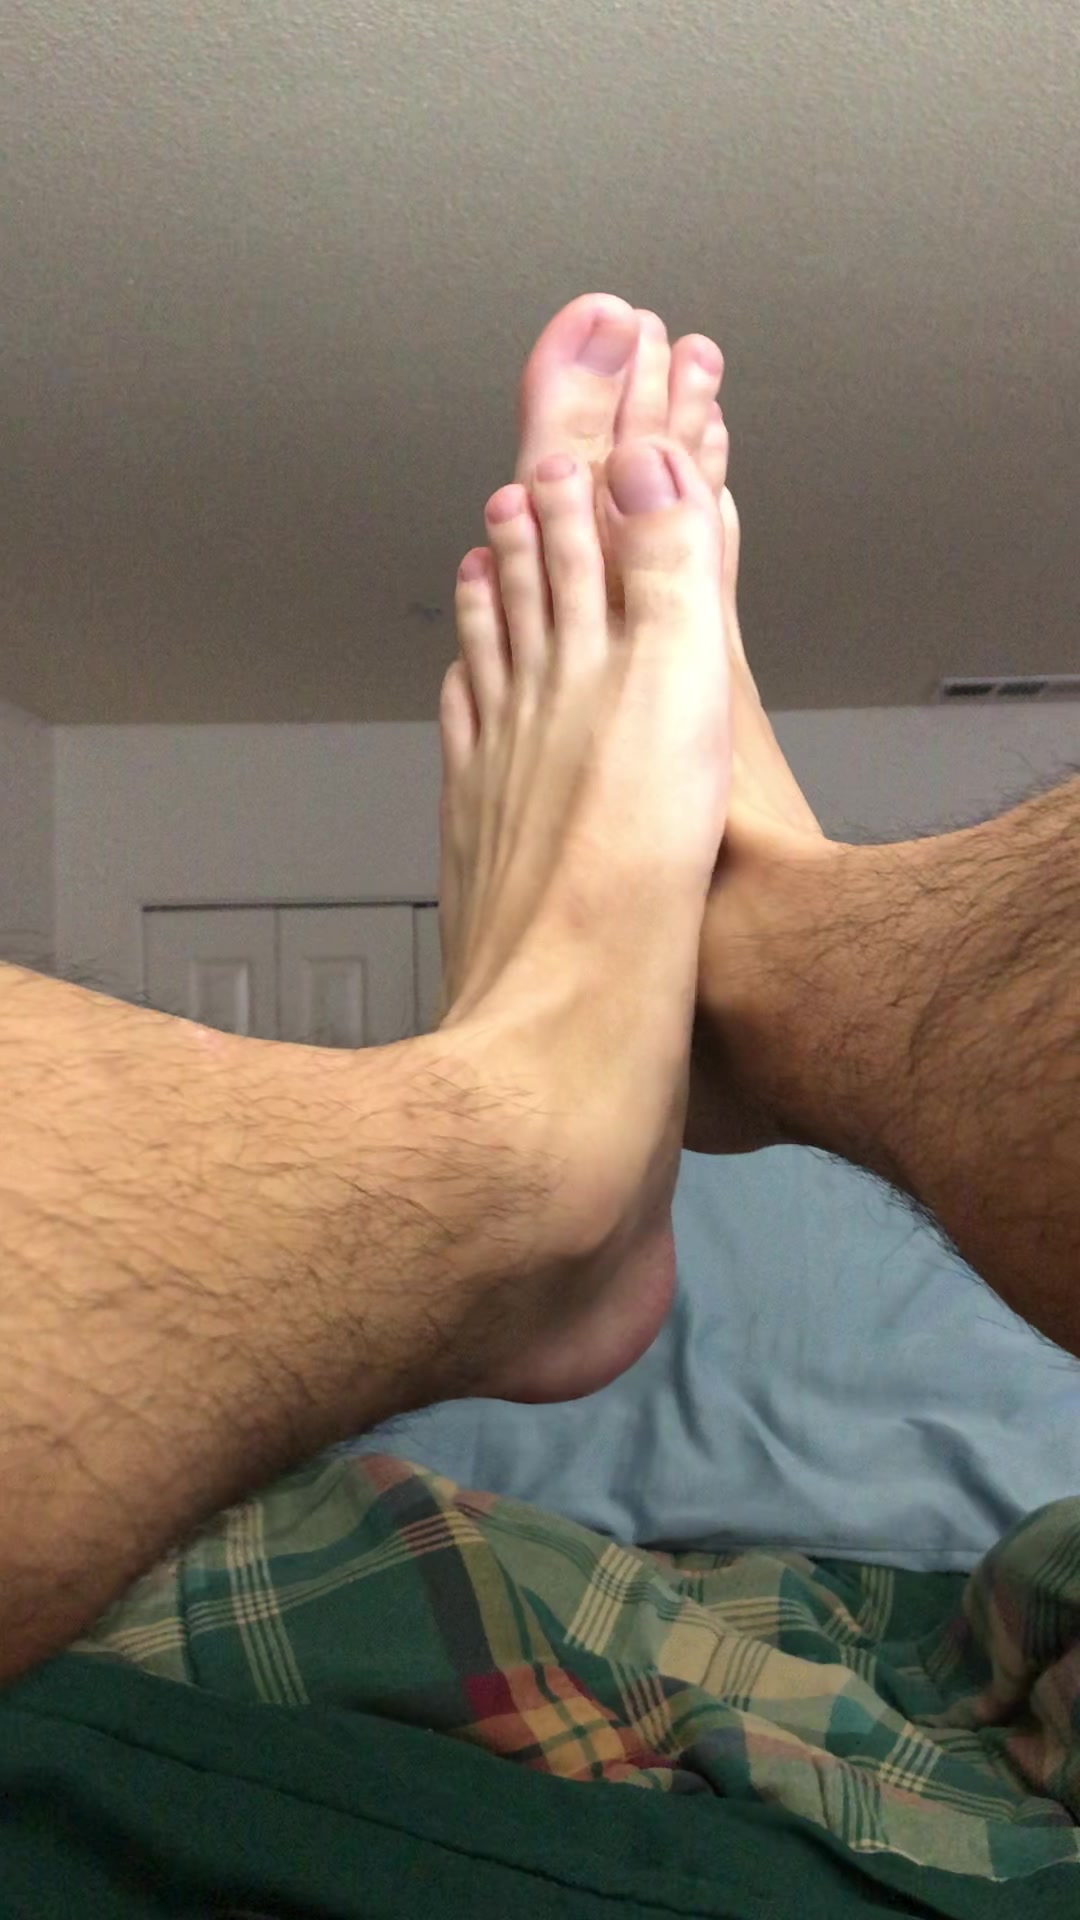 My feet on the bed